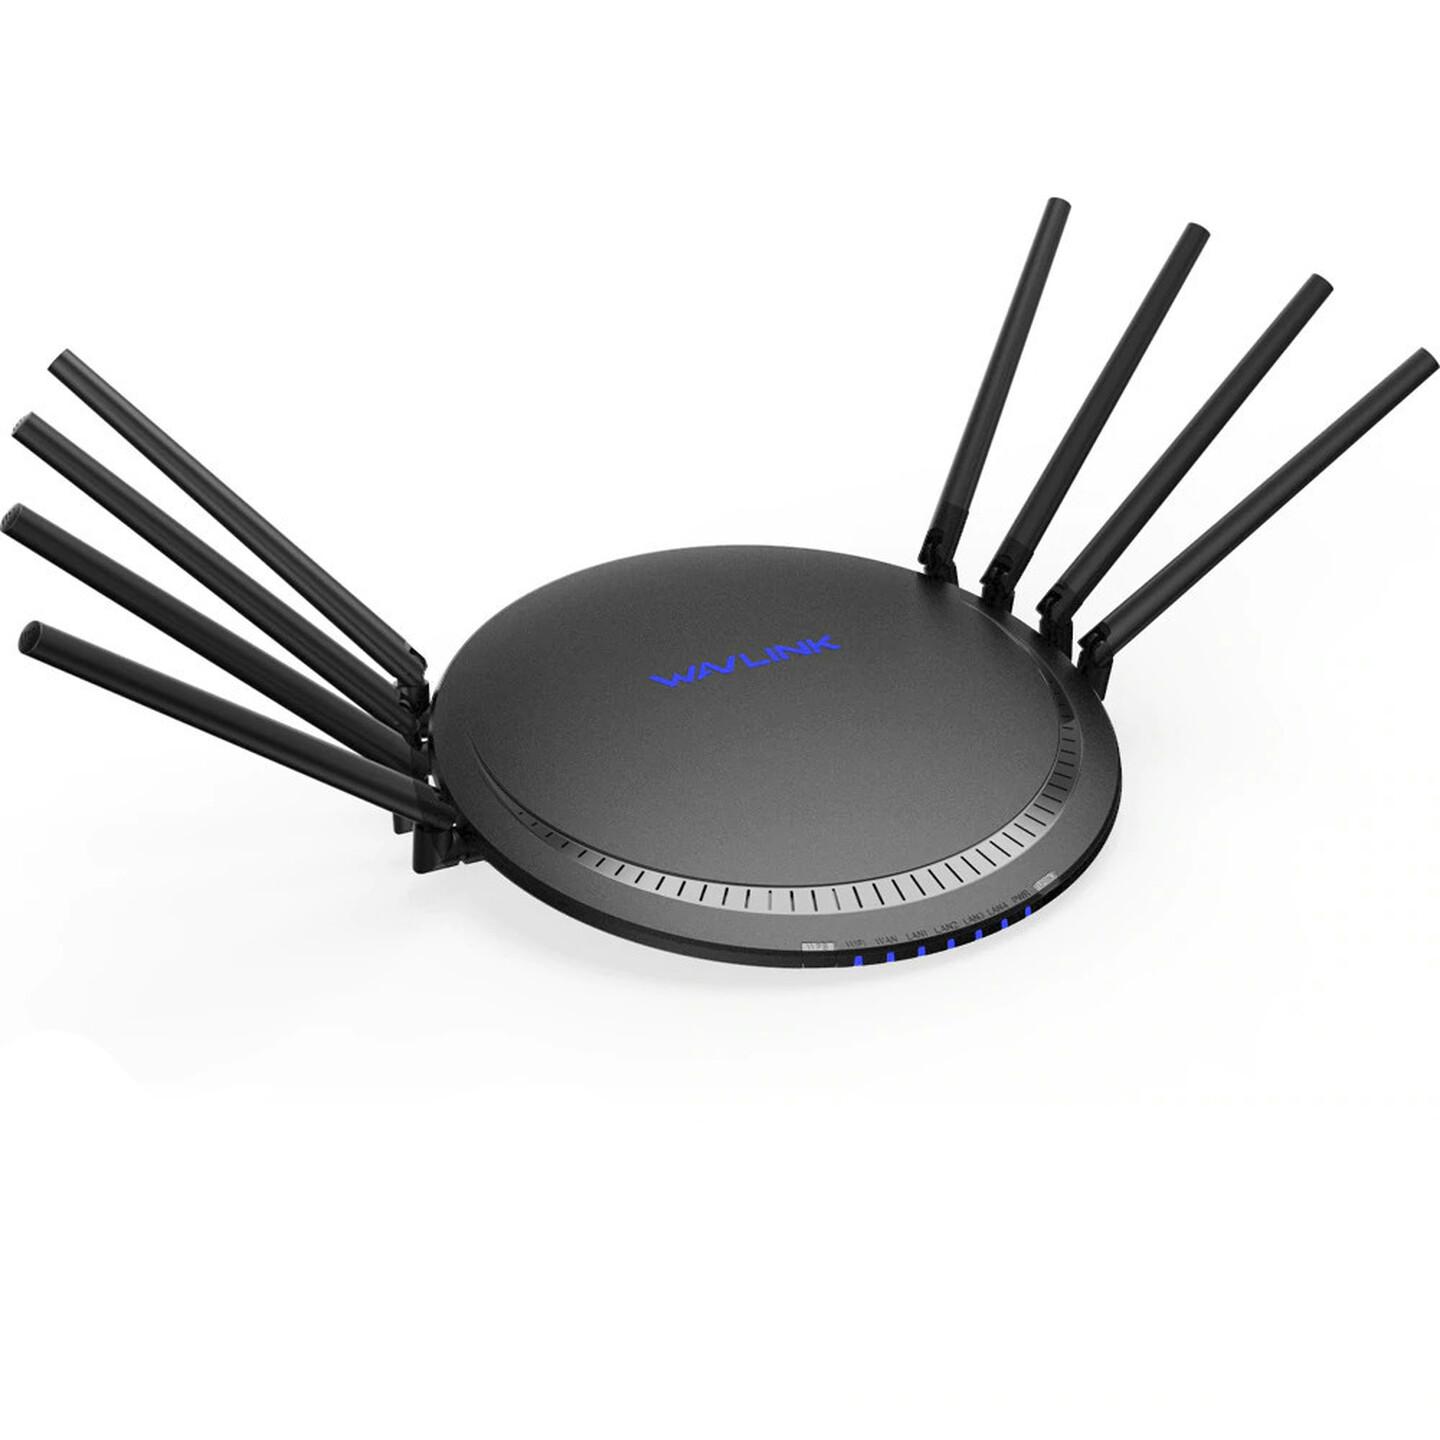 AC3000 Tri-Band Smart Wi-Fi Router with Touchlink and Giga Lan